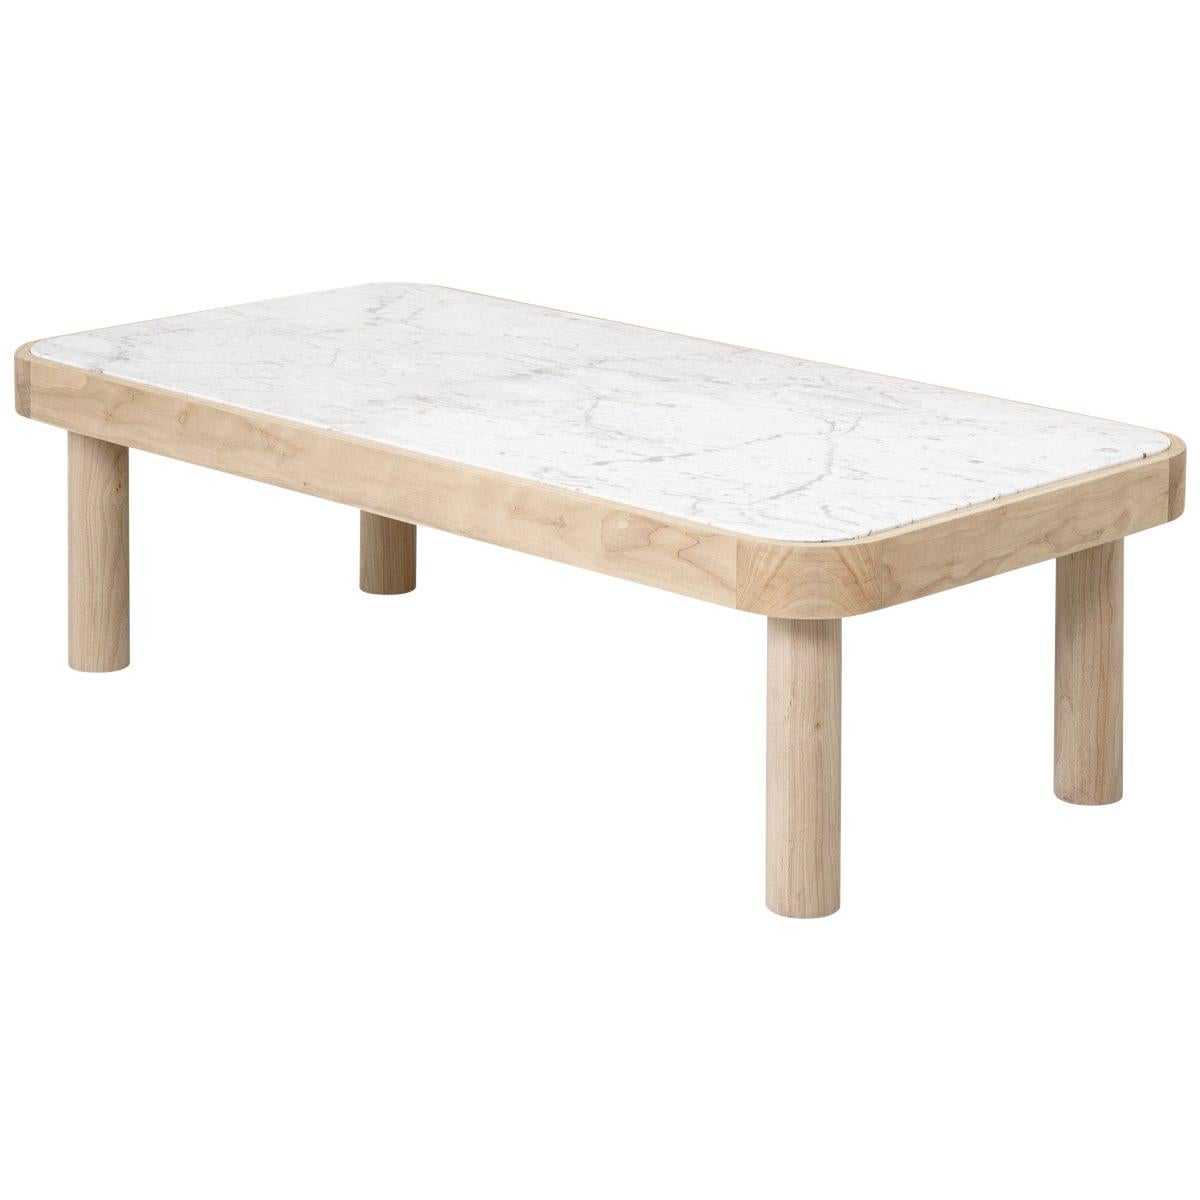 Round Edge Rectangular Bleached Walnut Coffee Table with White Carrara Inset Top